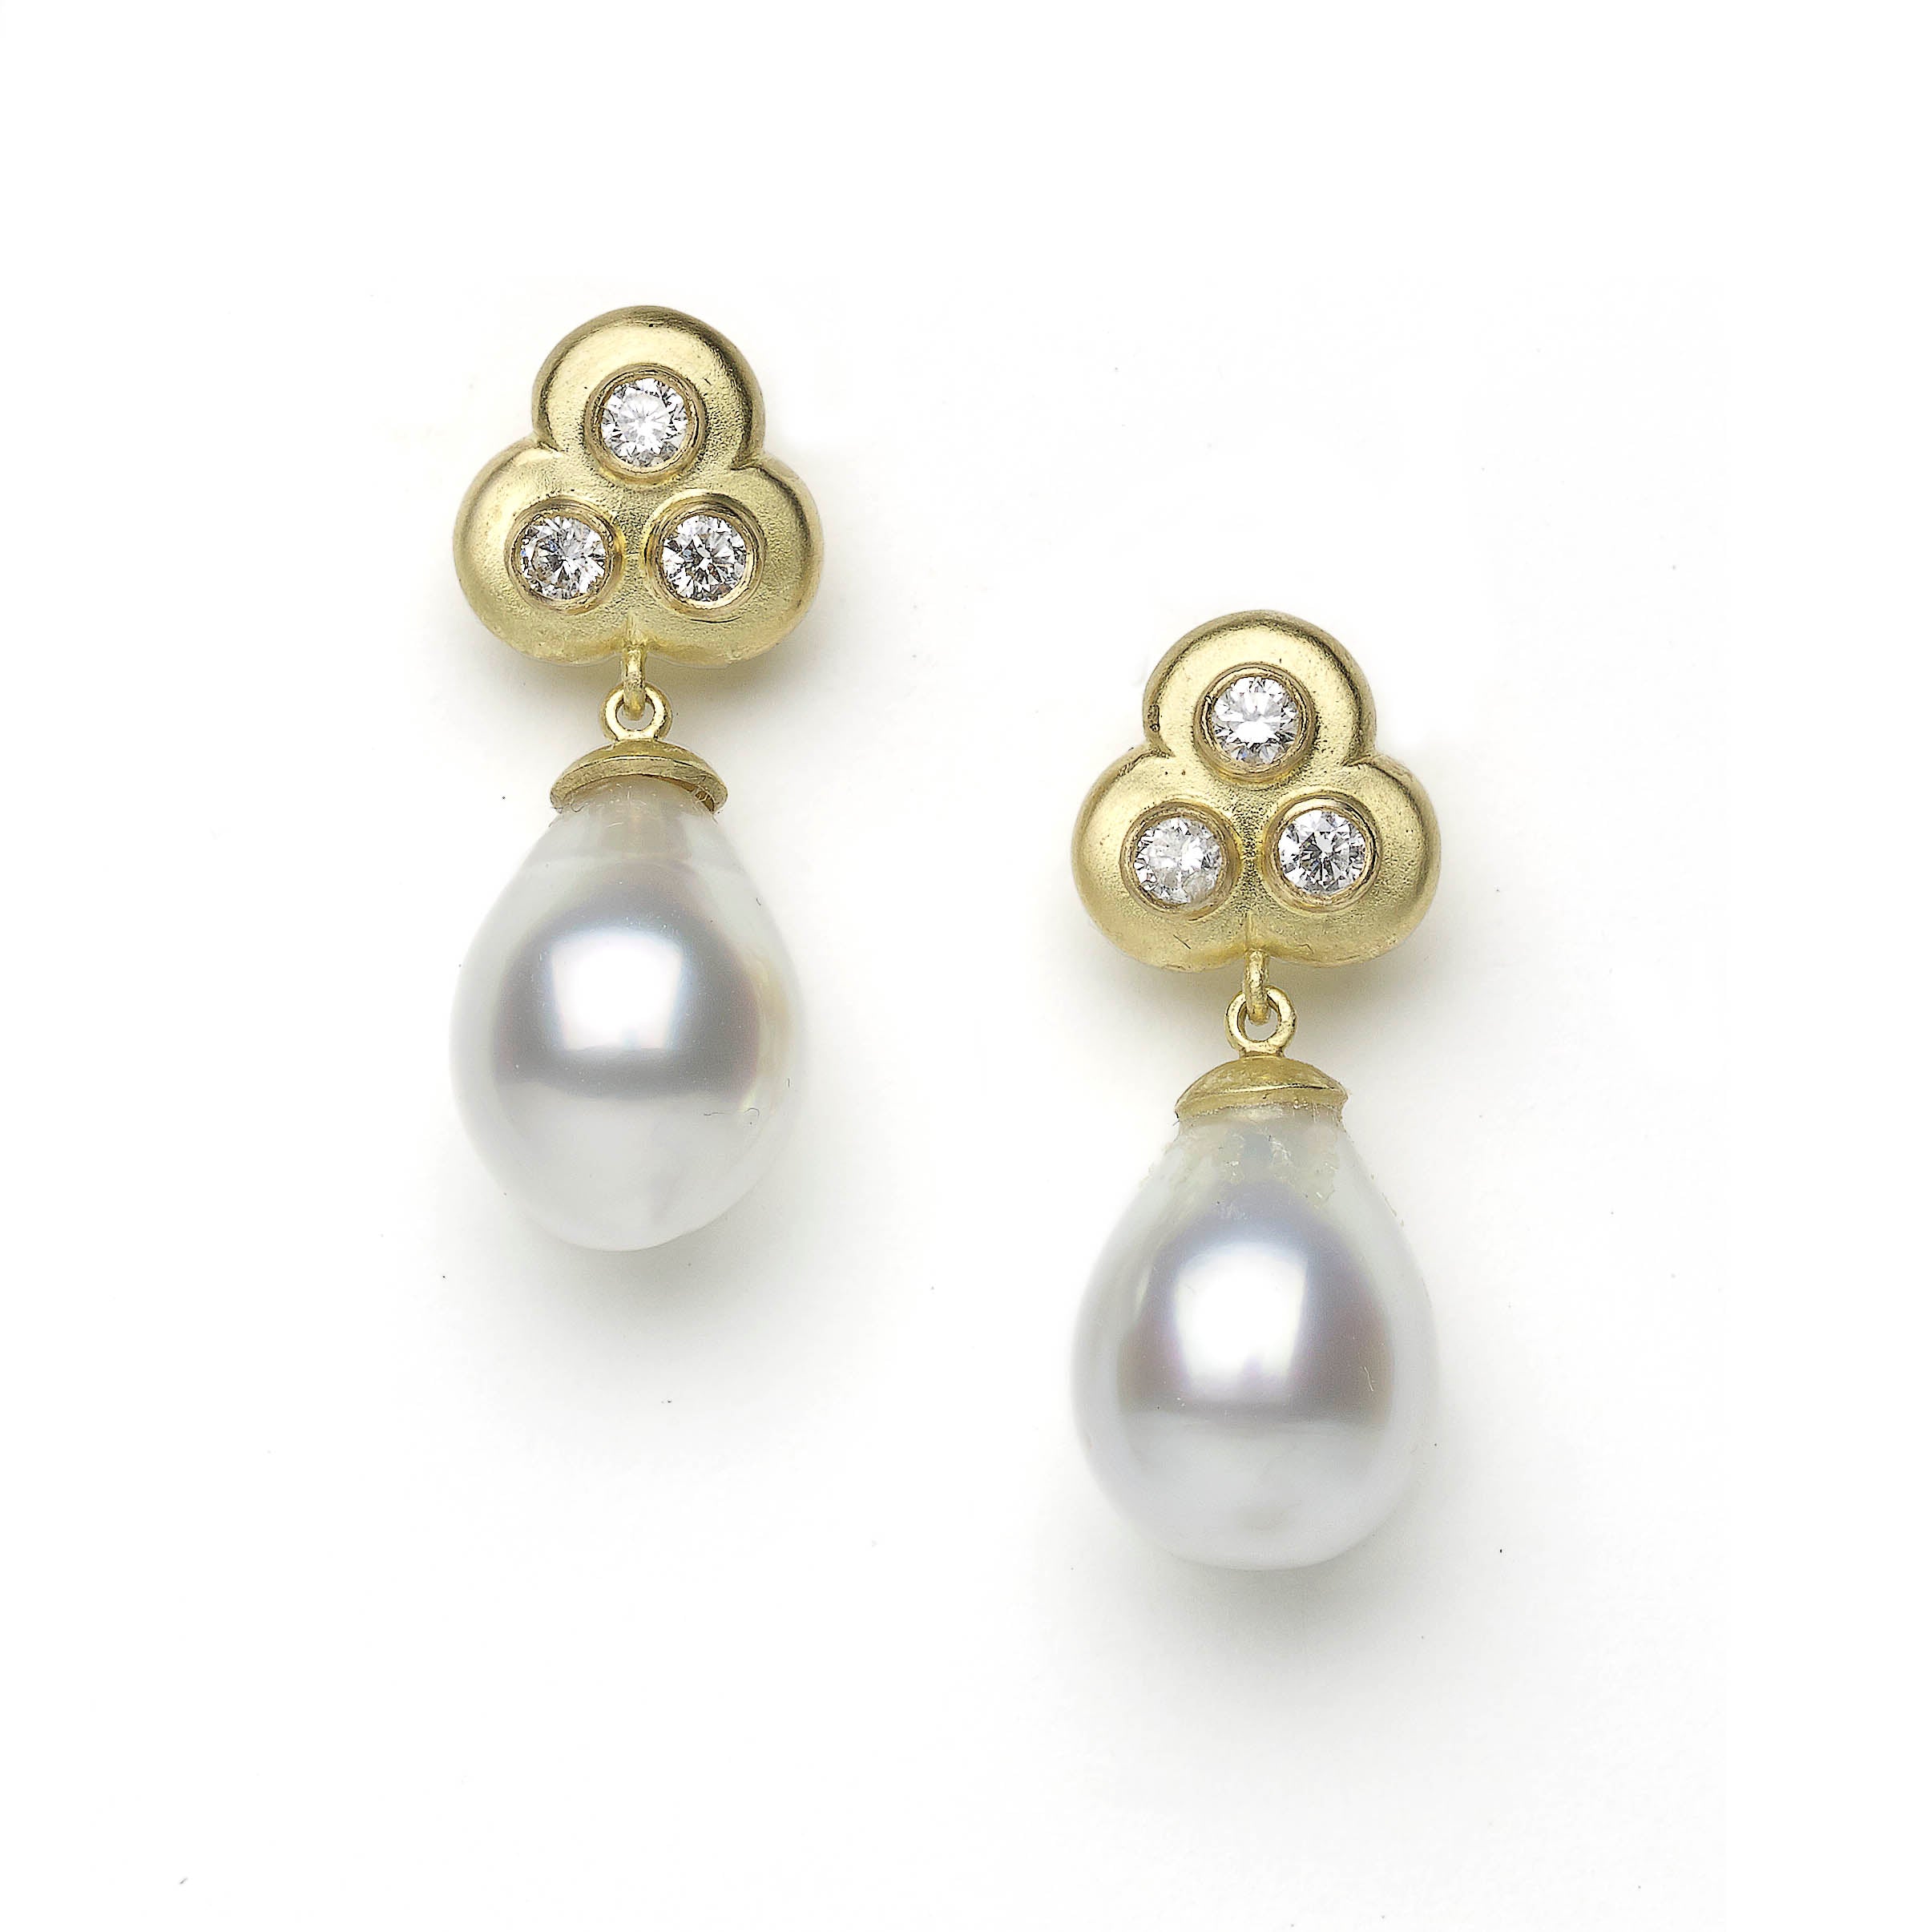 Trefoil diamond and pearl drop earrings on white background